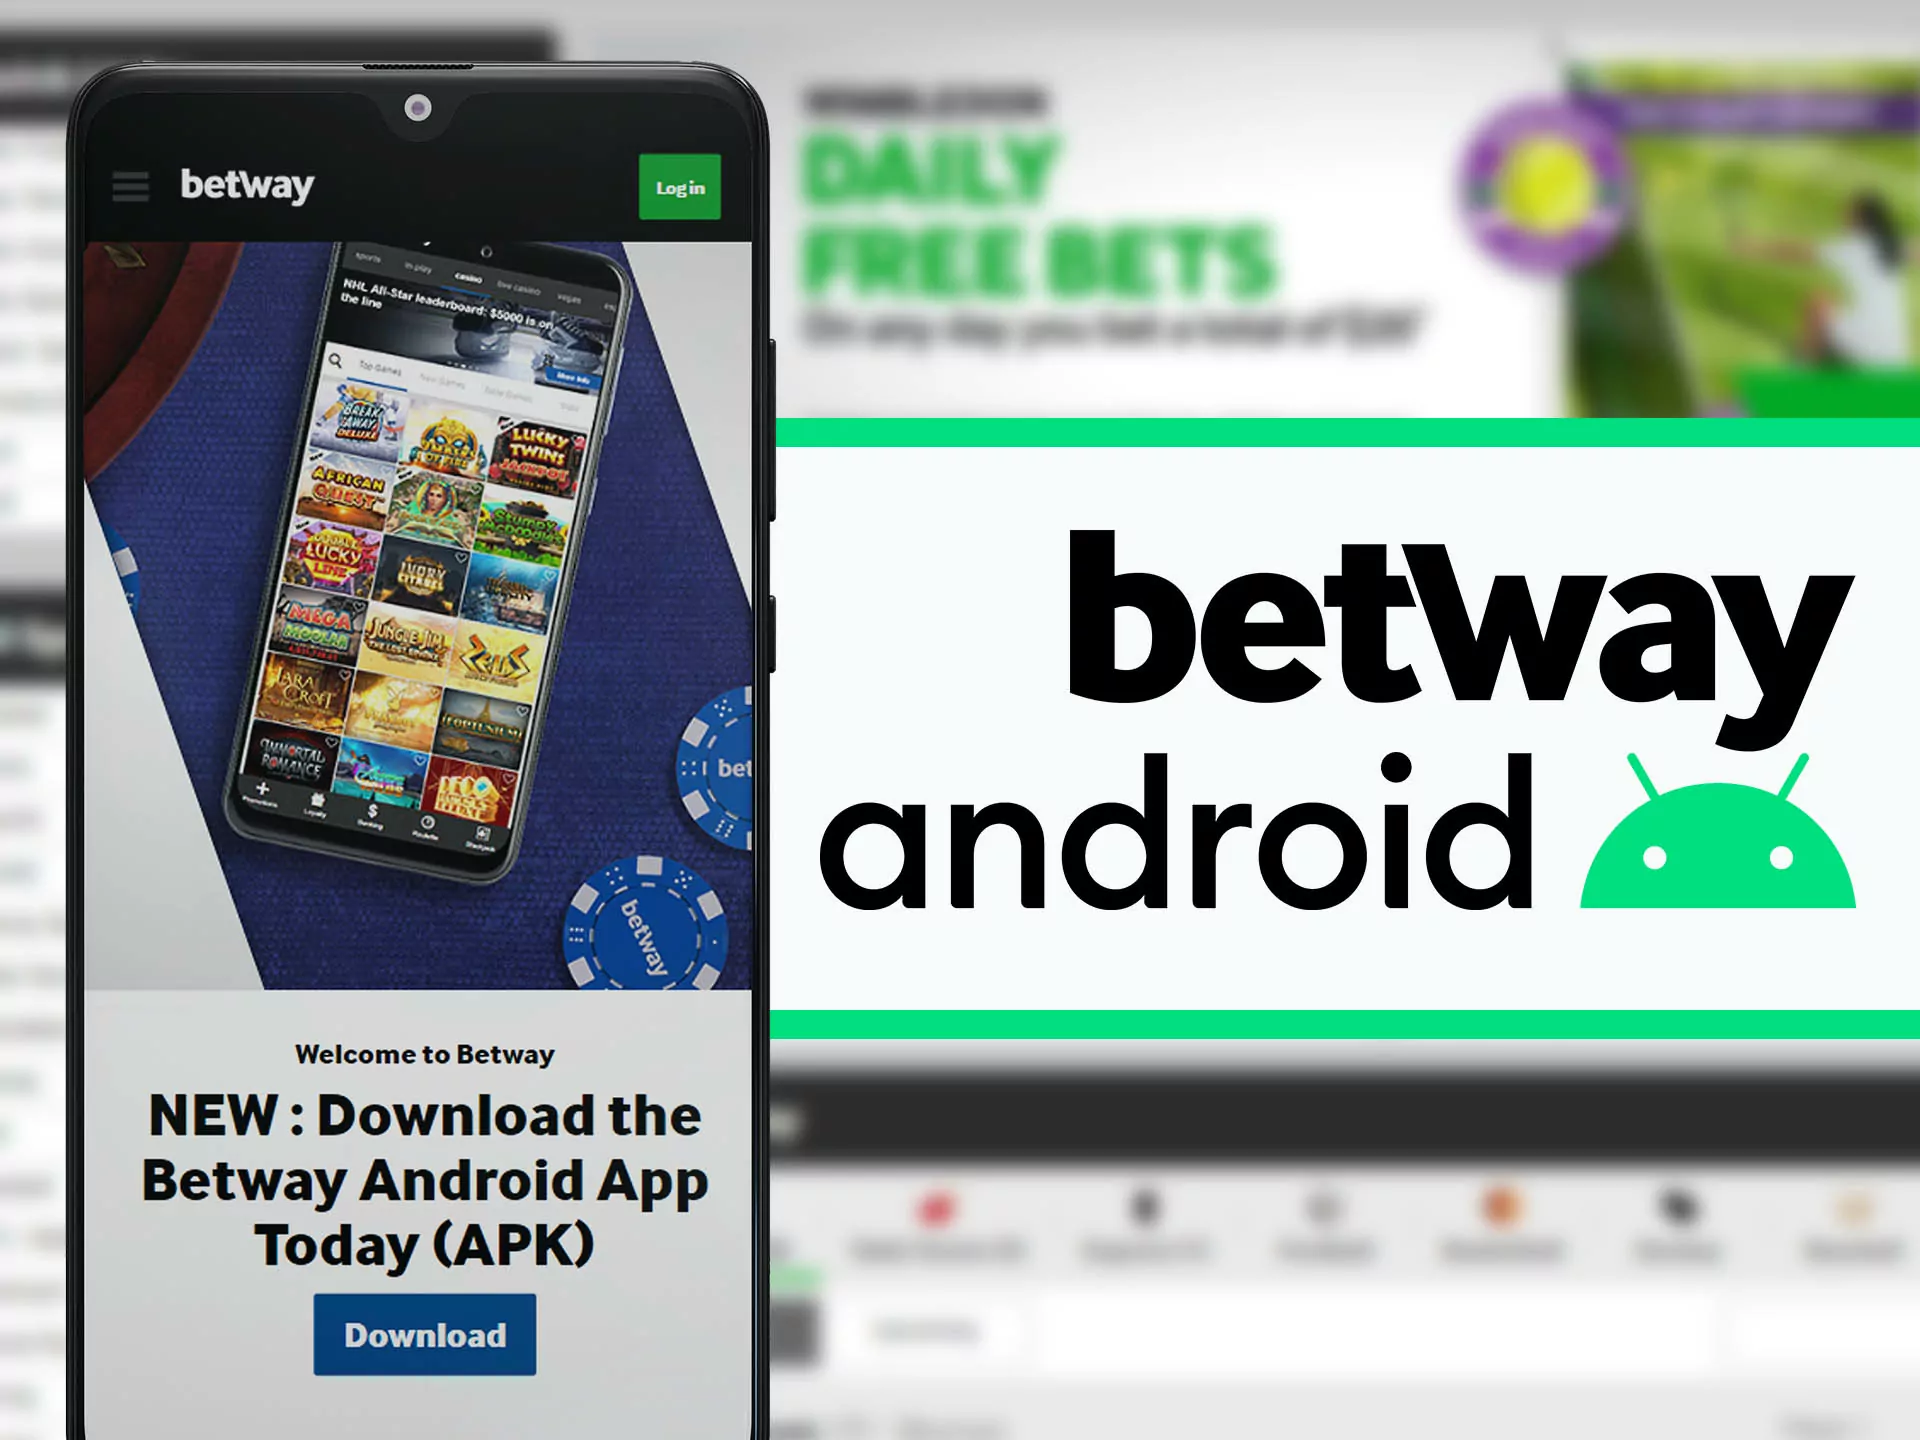 Download apk file and install Betway app on your phone.